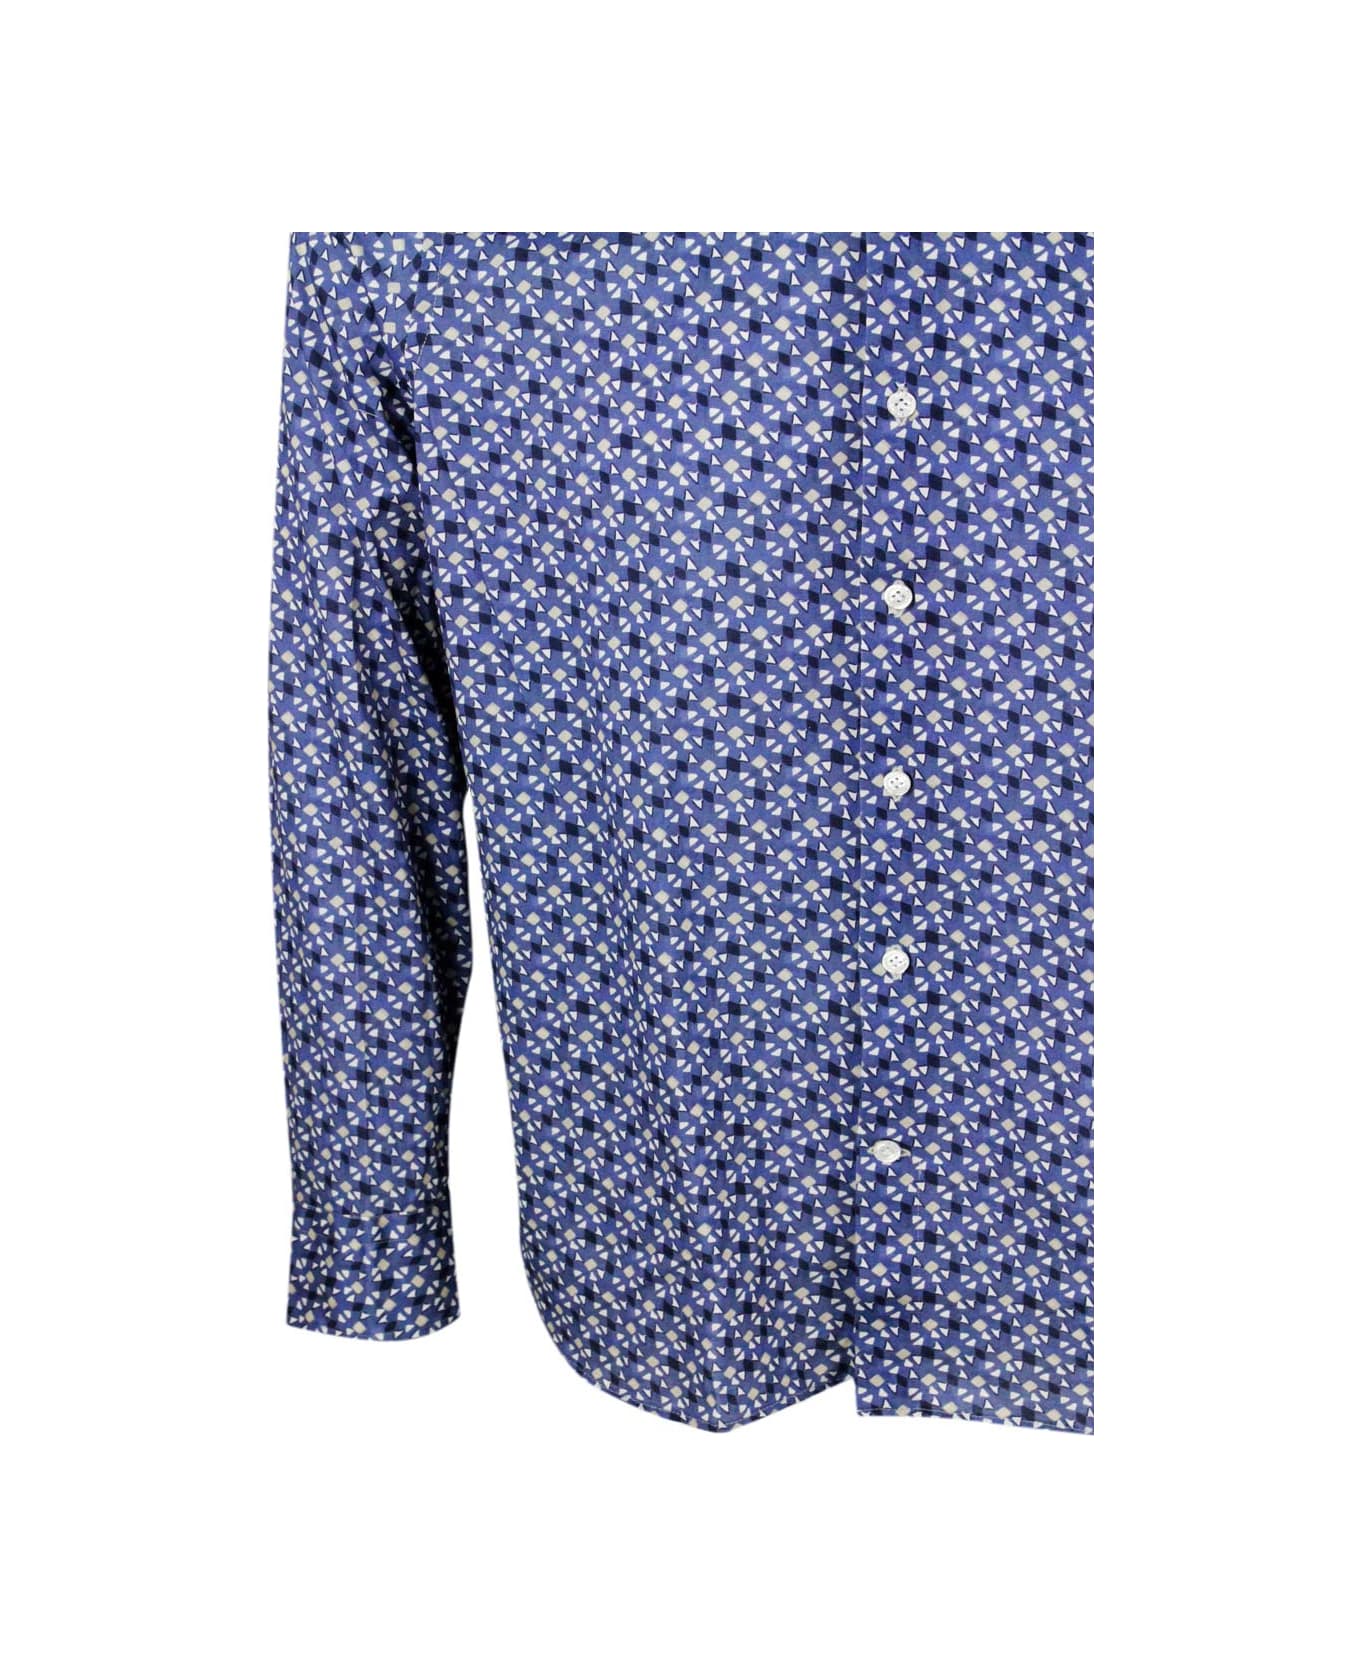 Sonrisa Luxury Shirt In Soft, Precious And Very Fine Stretch Cotton Flower With Spread Collar In Small Micro-pattern Print With Small Triangles. - Blu